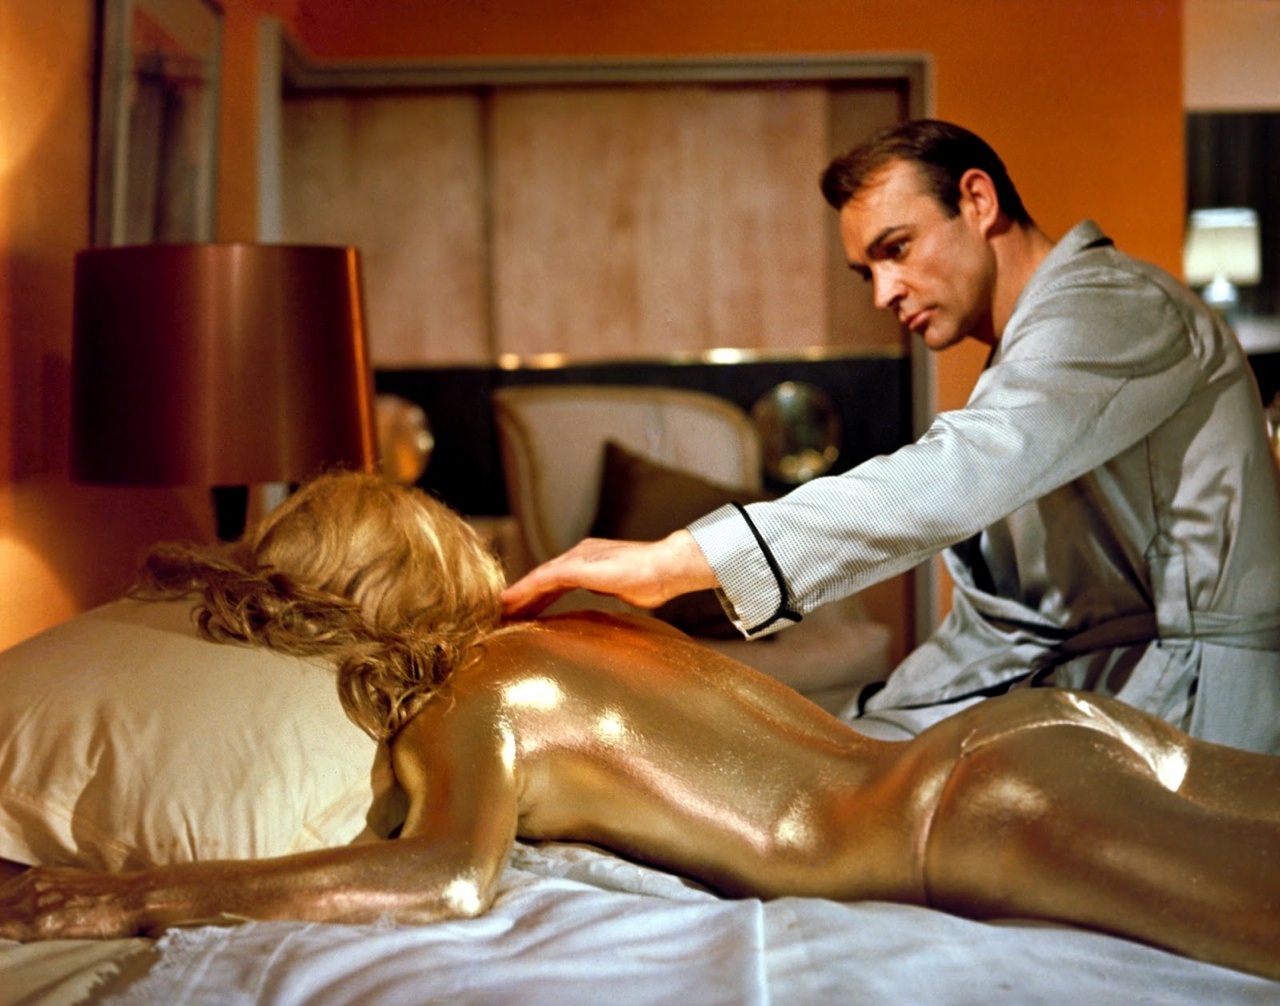 sean-connery-and-shirley-eaton-fontainebleau-hotel-miami-pinewood-studios-interior-shot-goldfinger-1964